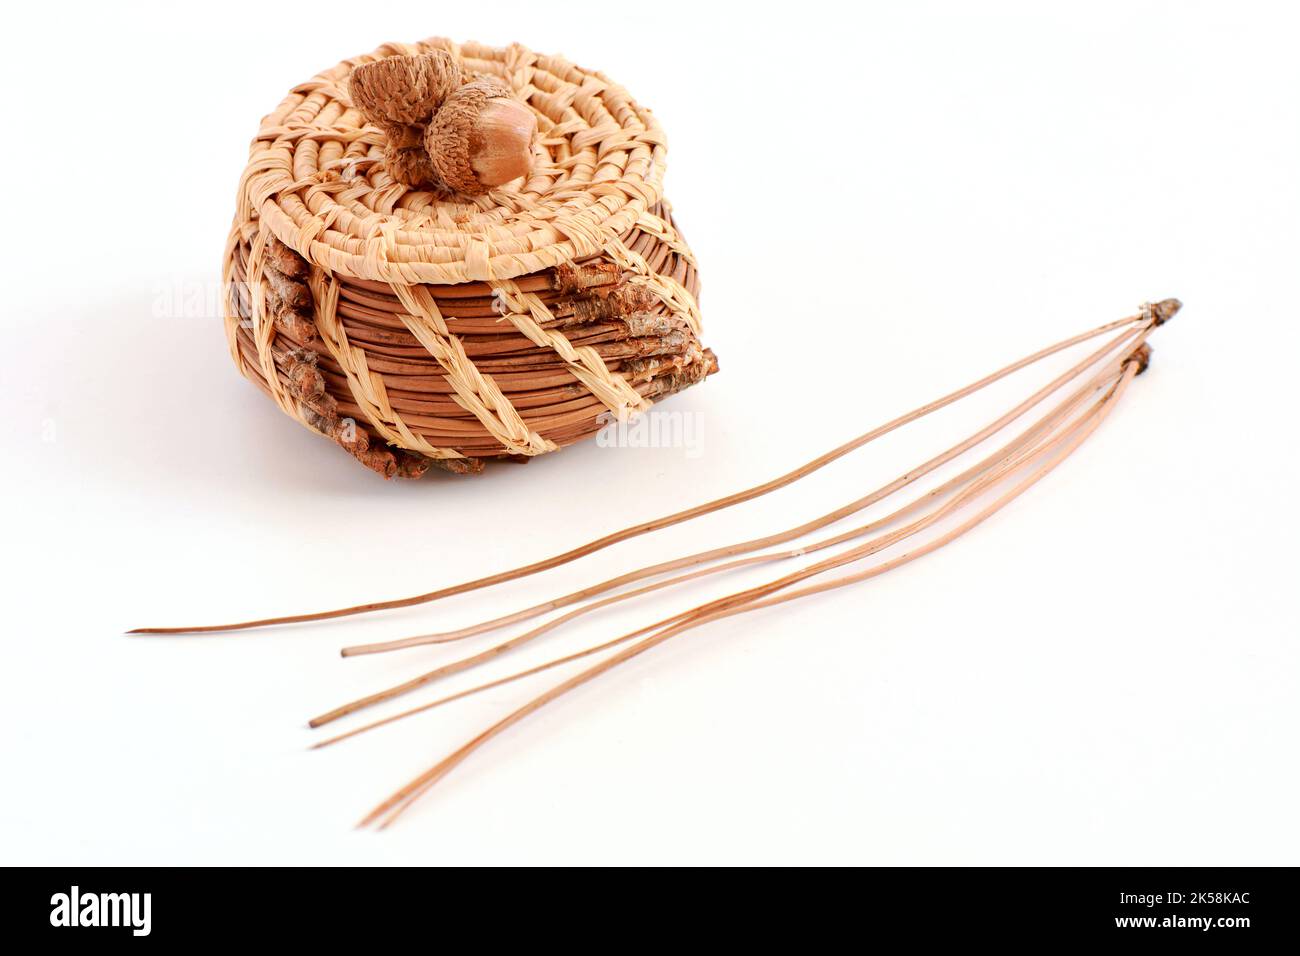 Tiny hand-made woven pine needle basket and pine needles shows ancient skill using natural materials.  Horizontal and shot on white background. Stock Photo